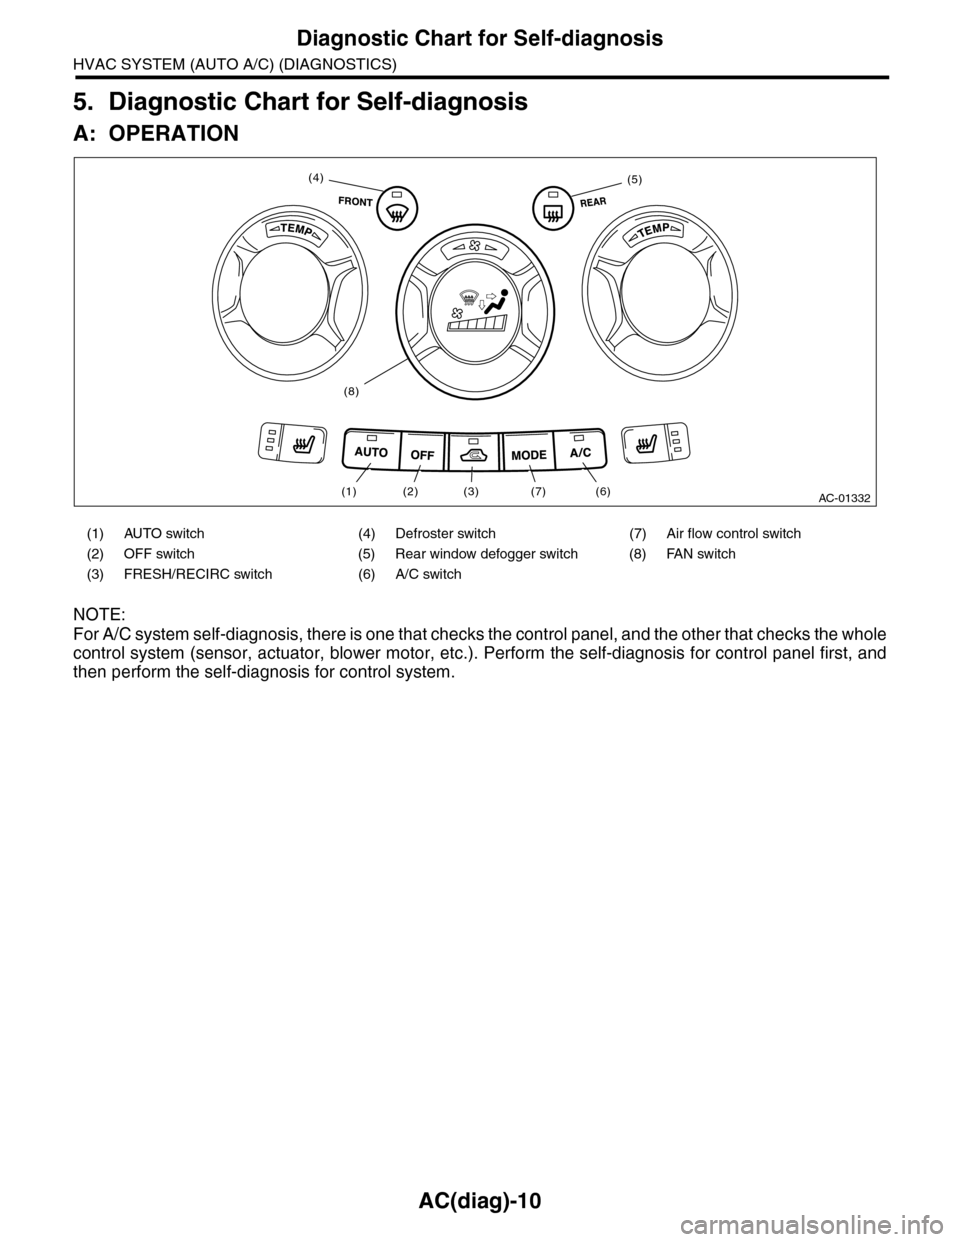 SUBARU TRIBECA 2009 1.G Service Manual PDF AC(diag)-10
Diagnostic Chart for Self-diagnosis
HVAC SYSTEM (AUTO A/C) (DIAGNOSTICS)
5. Diagnostic Chart for Self-diagnosis
A: OPERATION
NOTE:
For A/C system self-diagnosis, there is one that checks t